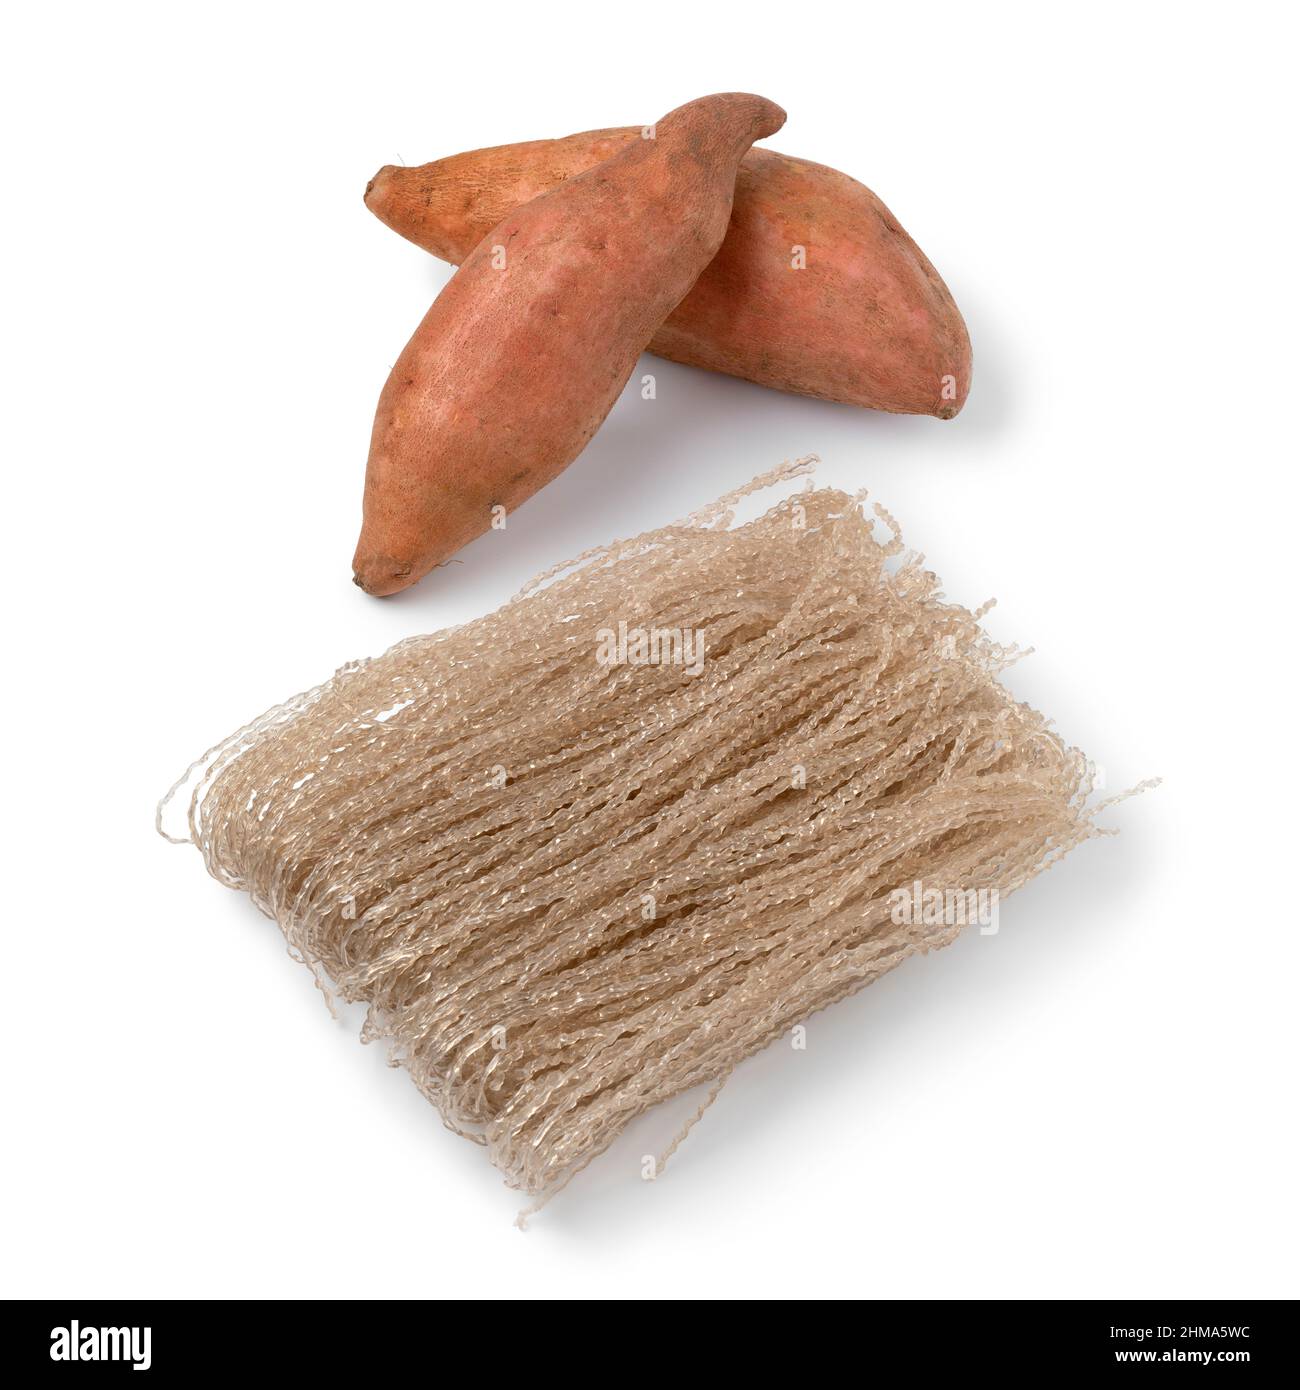 Sweet potato starch glass noodle, Dangmyeon, and fresh sweet potatoes isolated on white background Stock Photo